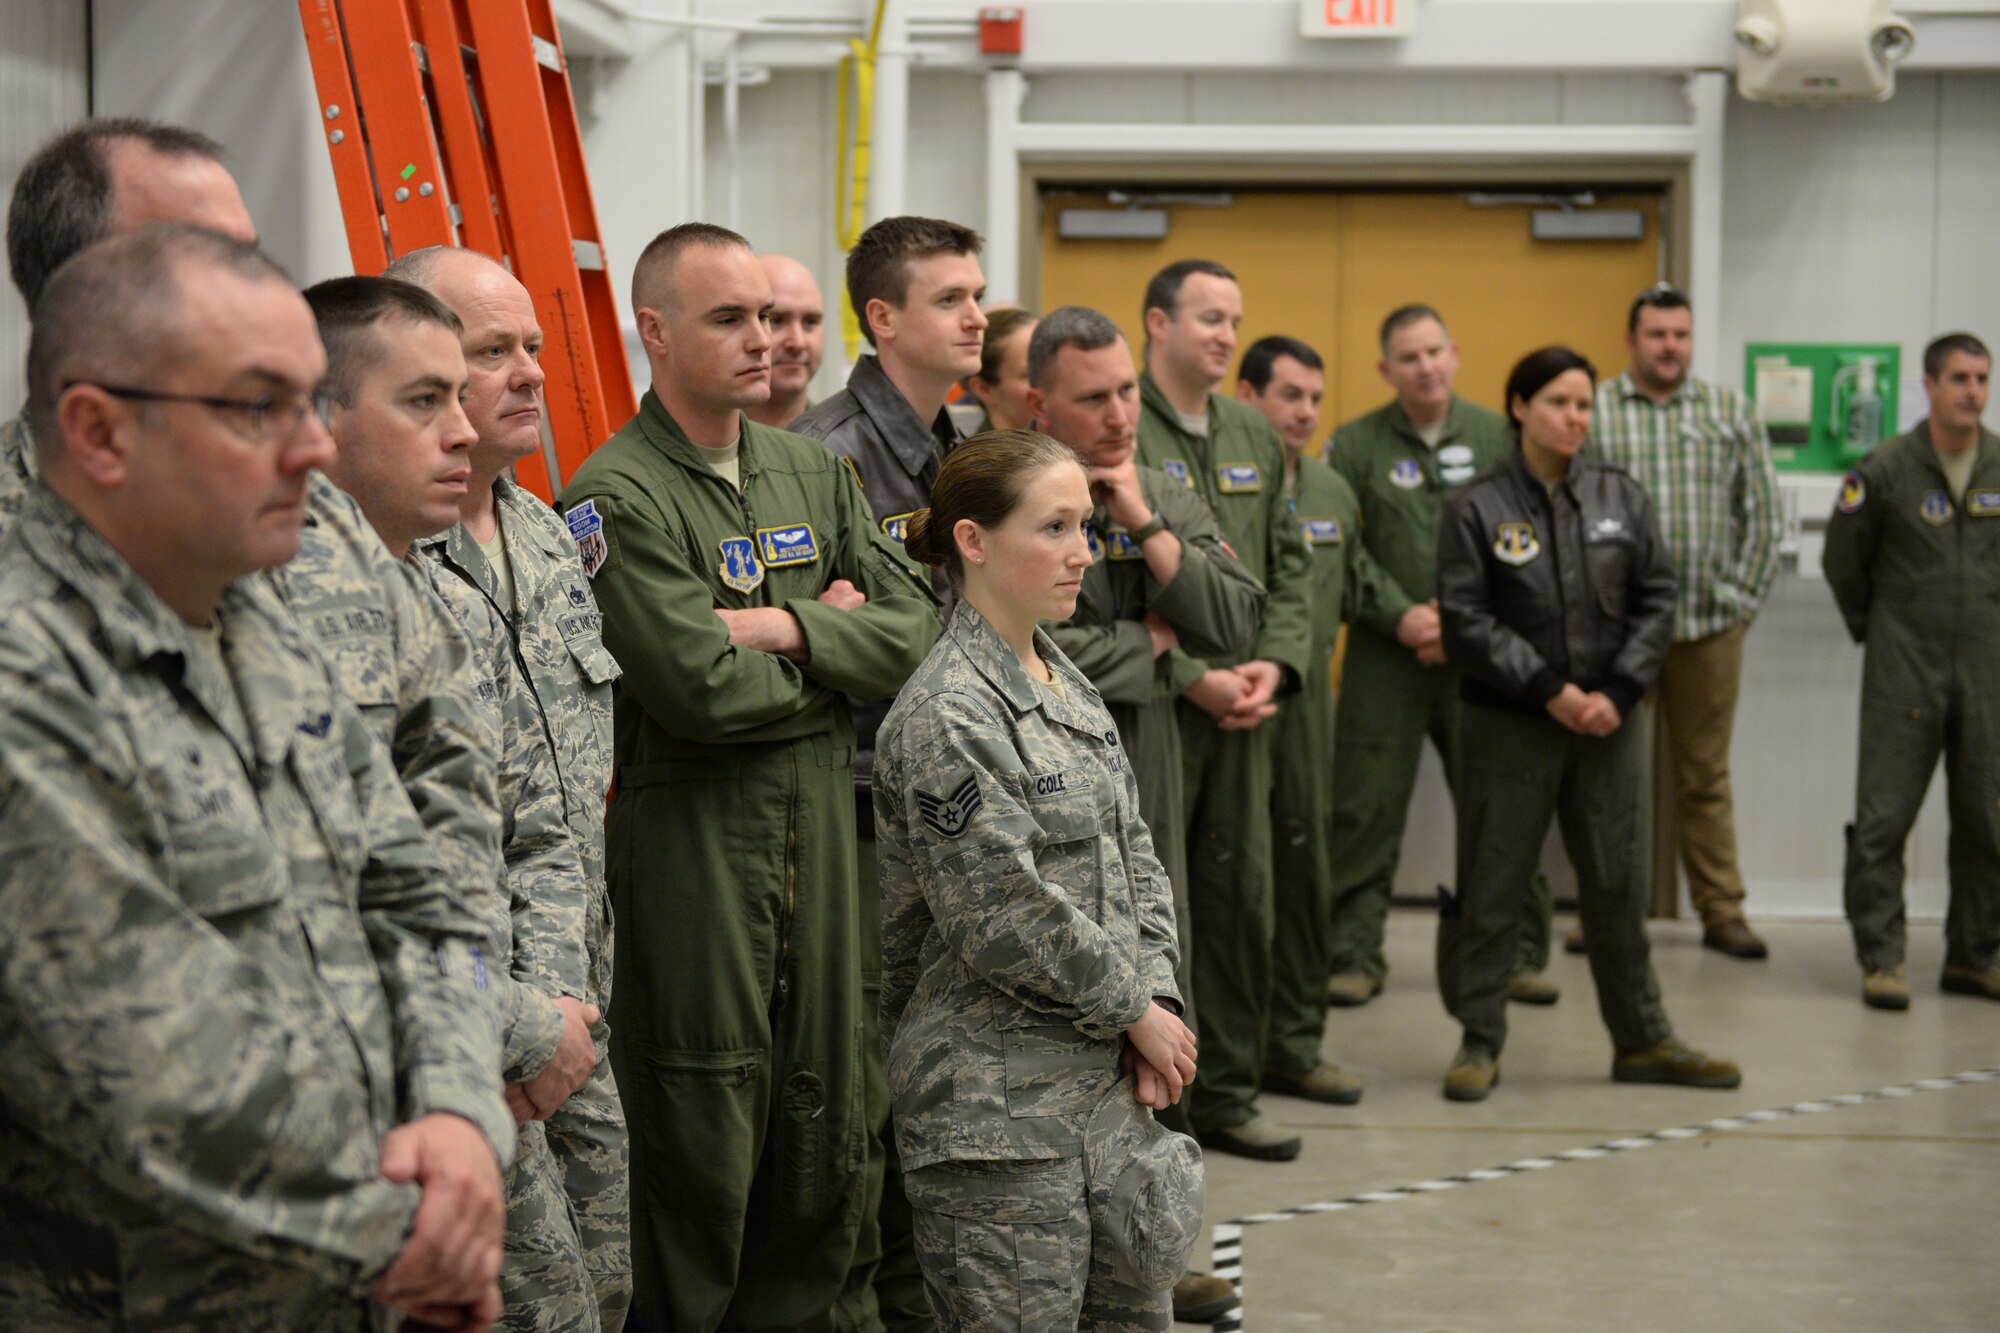 U.S. Airmen with the 157th Air Refueling Wing, New Hampshire Air National Guard attend an event marking the retirement of the KC-135 flight simulator from Pease Air National Guard Base, New Hampshire, March, 9, 2016.  The simulator is being retired to make way for a new KC-46 weapons trainer slated to arrive in the spring of 2017. (U.S. Air National Guard photo by Staff Sgt. Curtis J. Lenz)